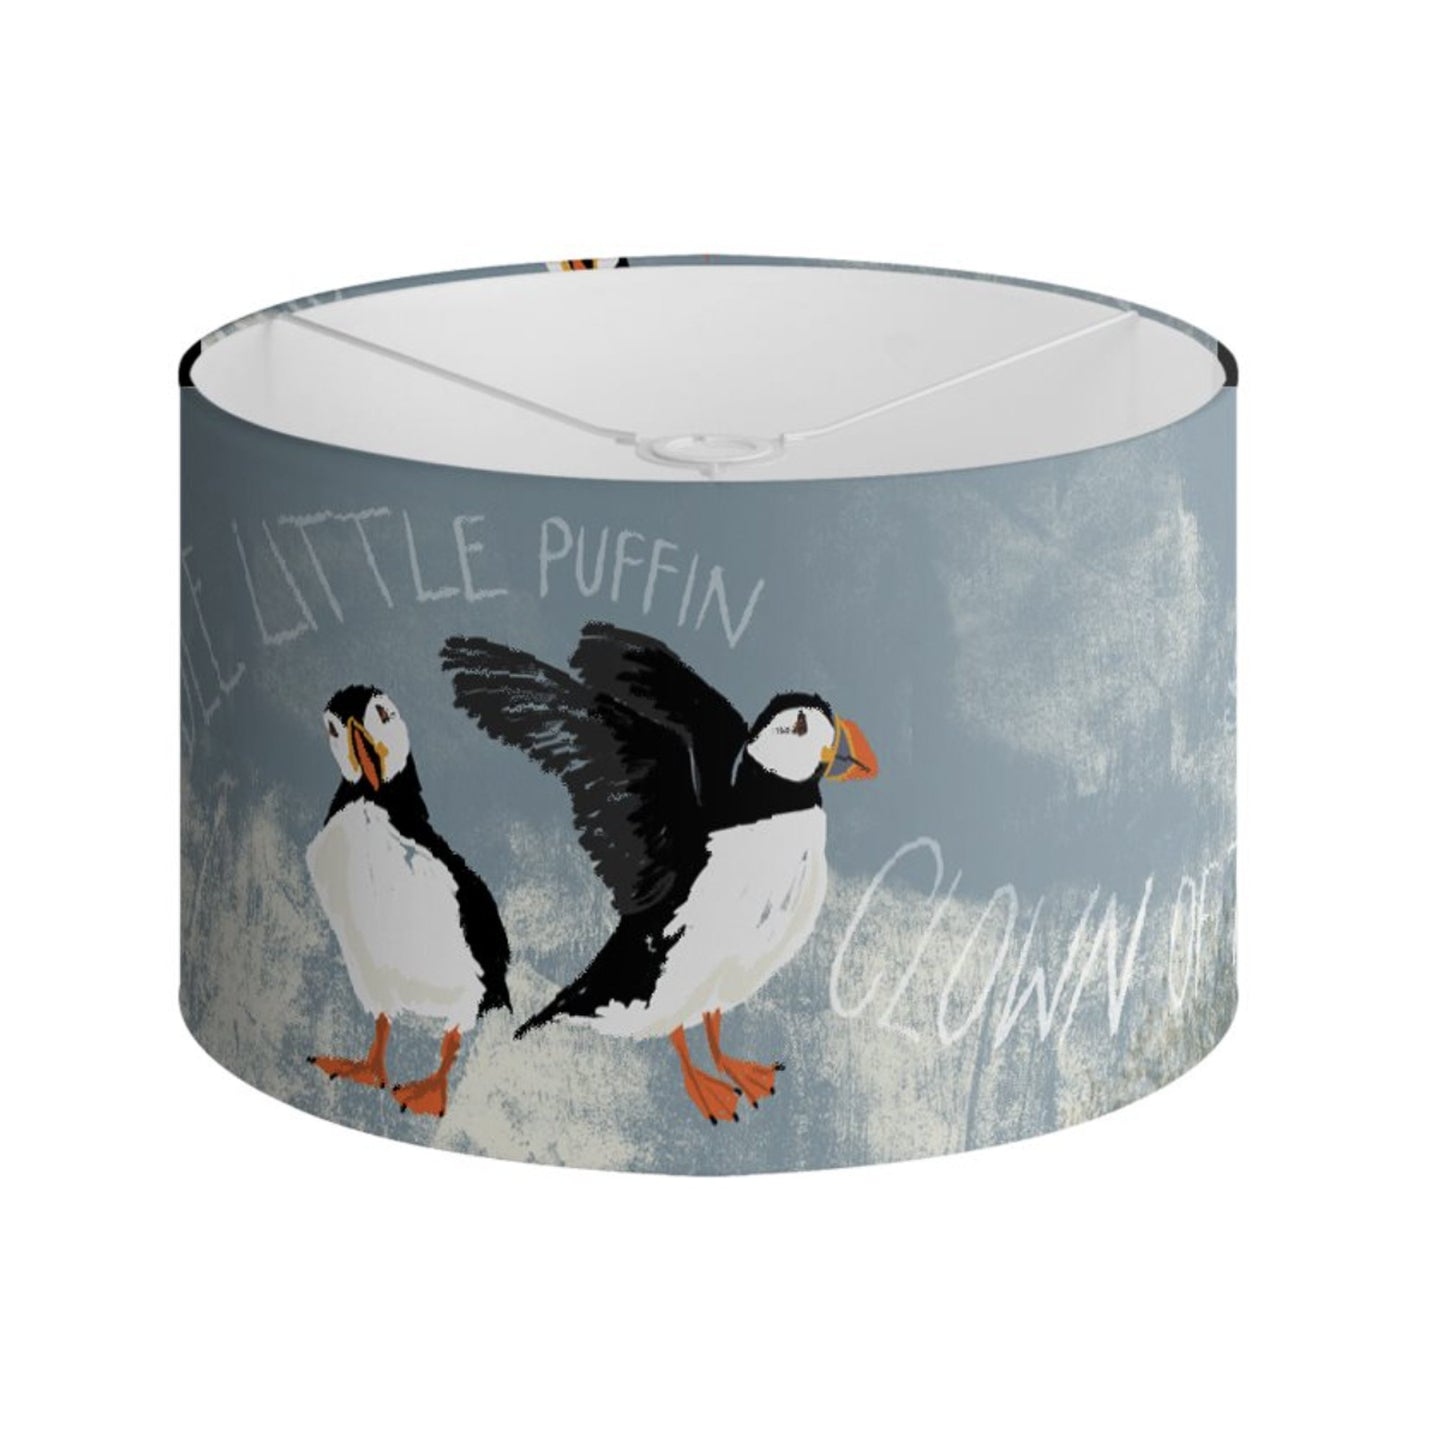 Harbourlane - Puffin Lampshade